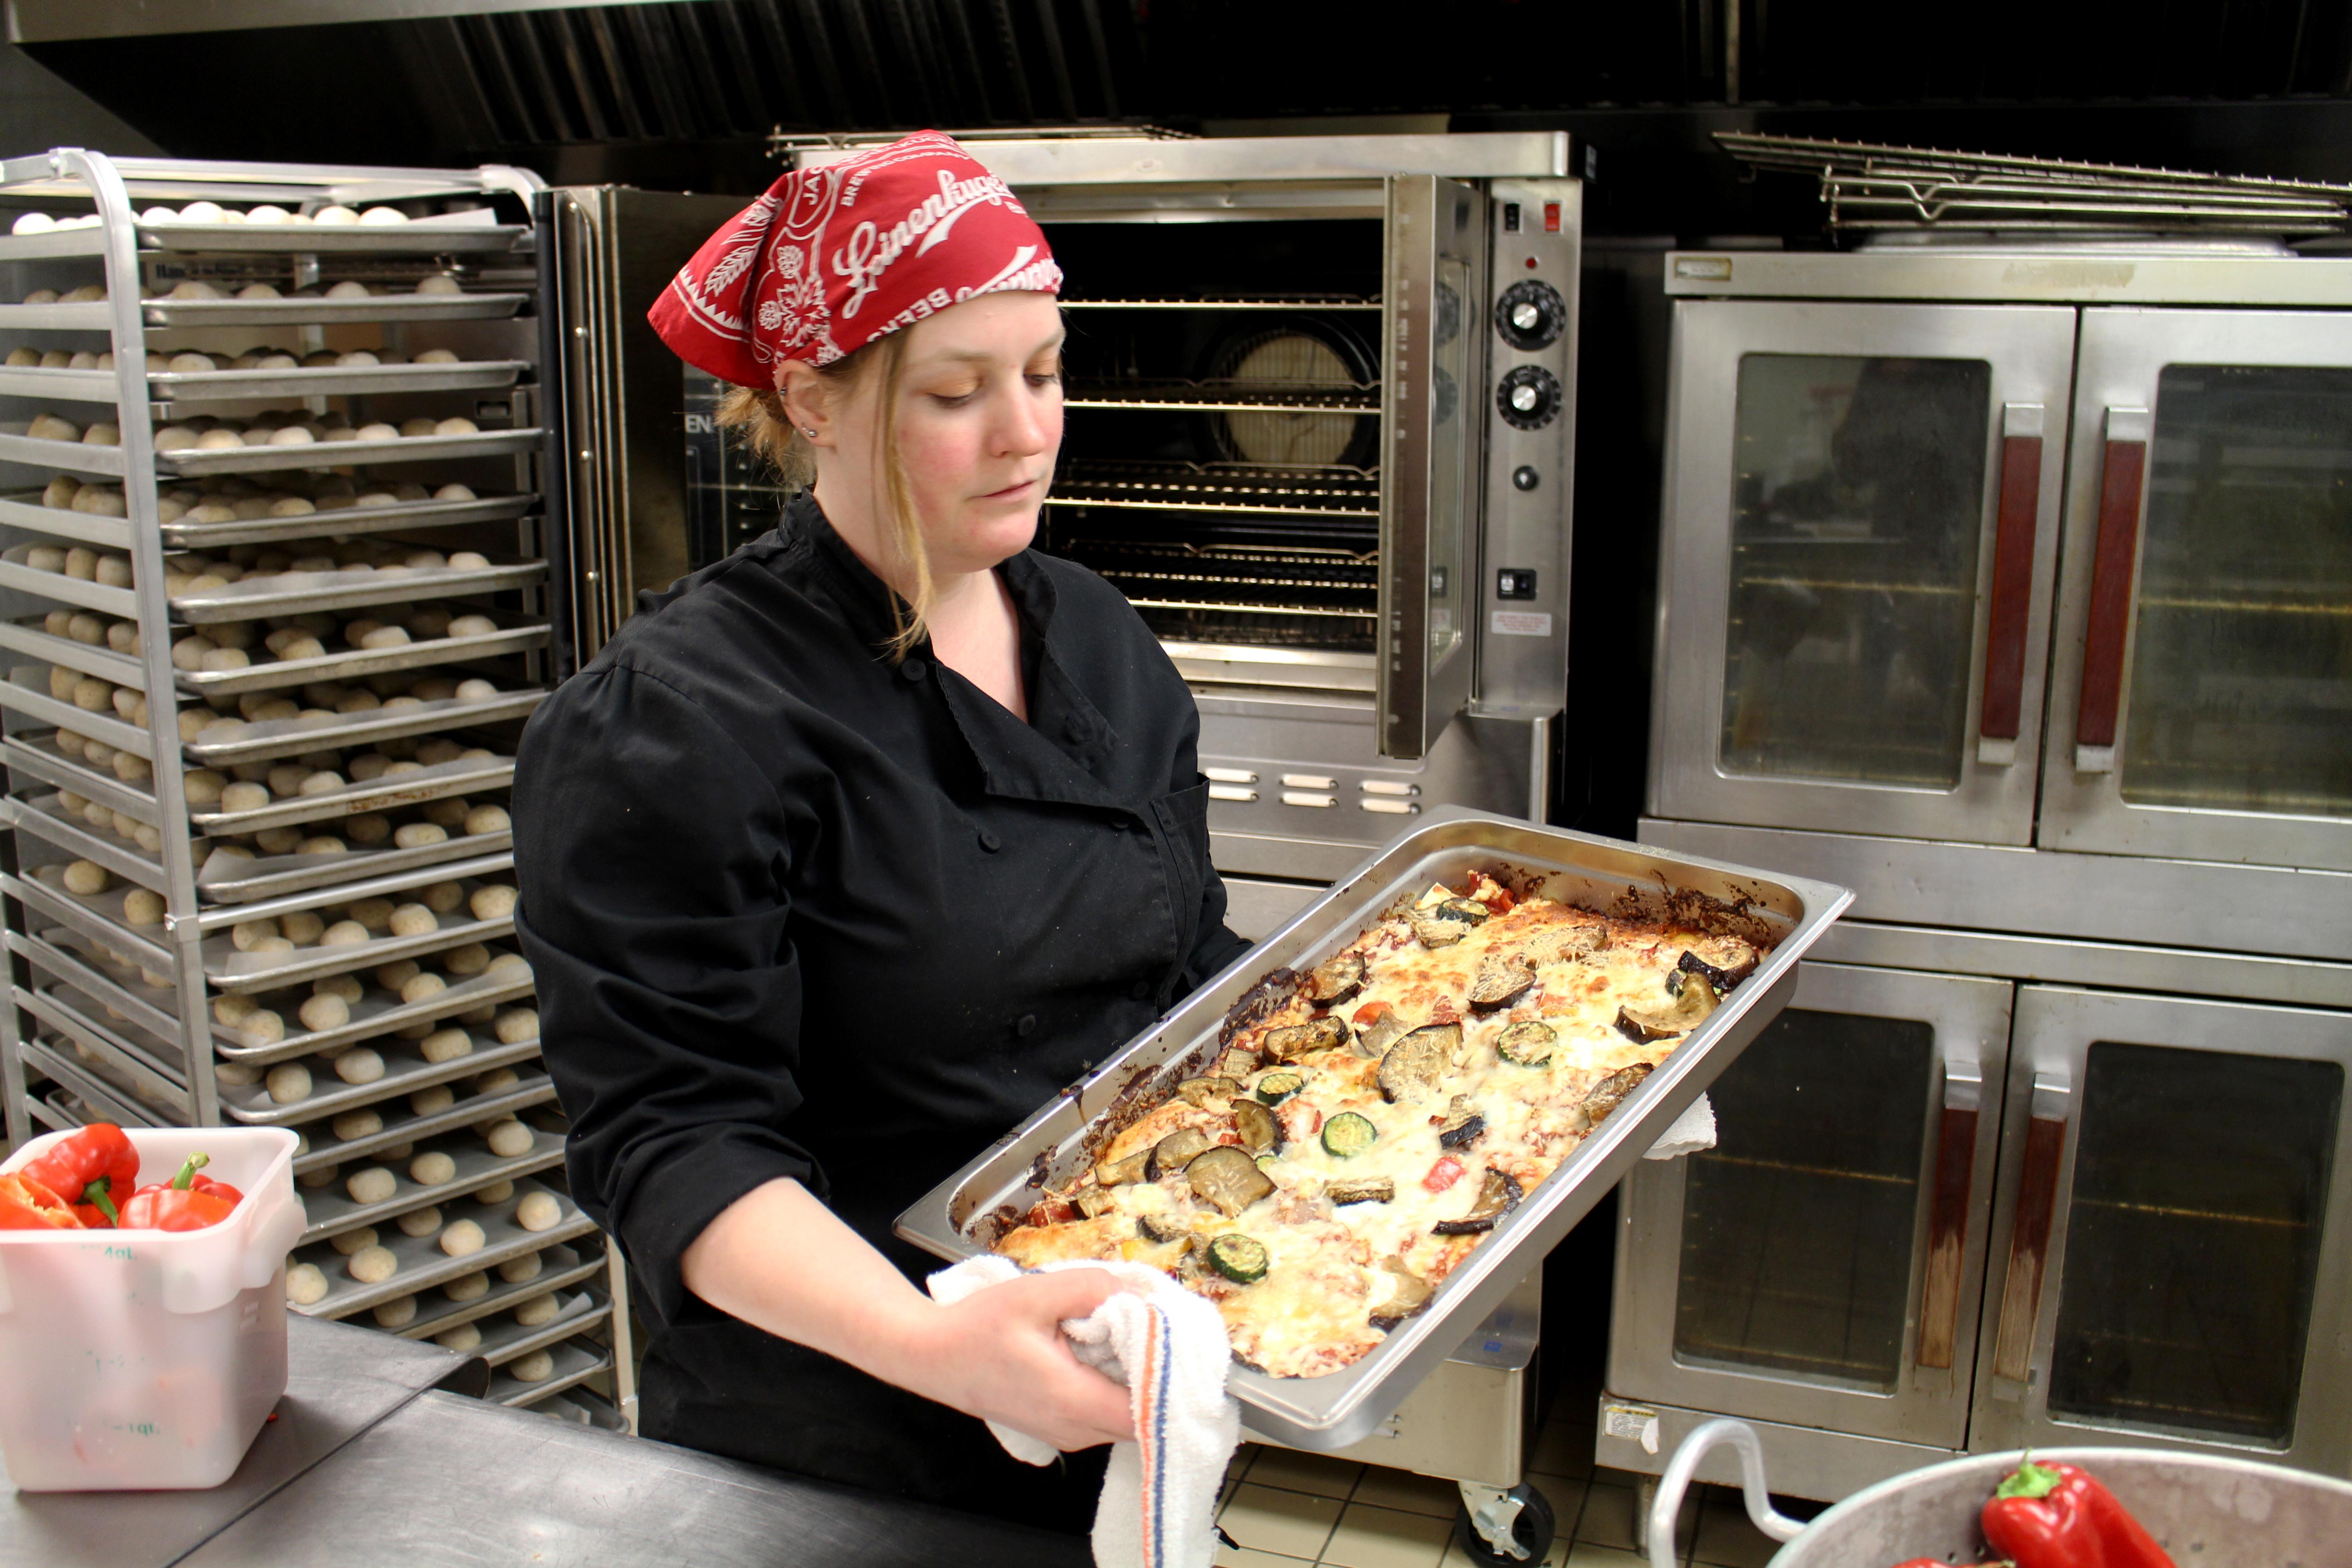 New Kitchen of Opportunities chef Michelle Spieker removes vegetable lasagna from oven